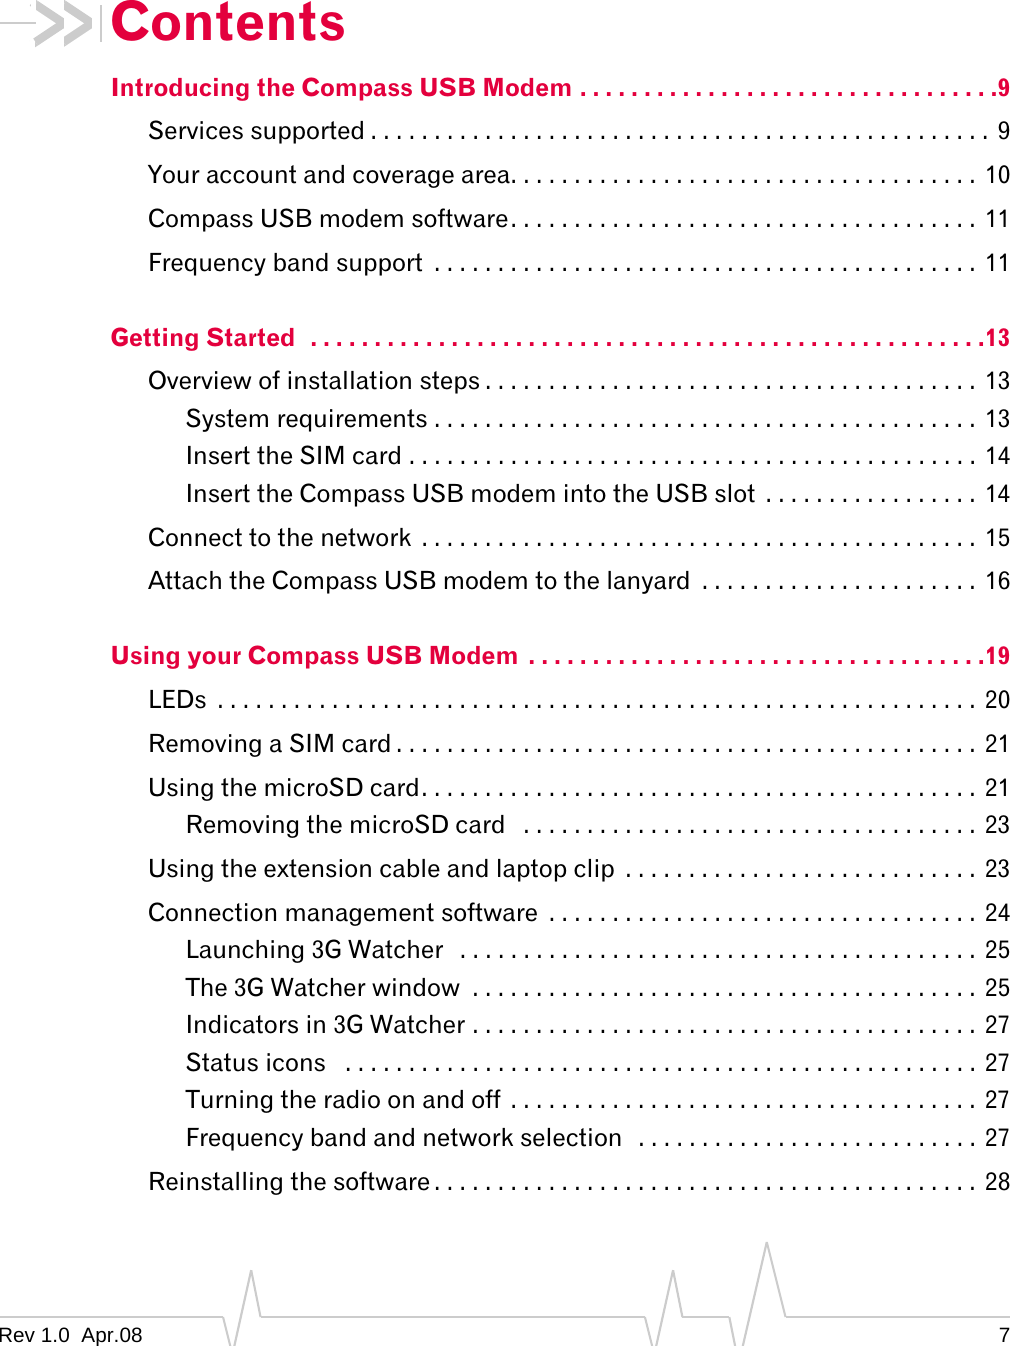 Contents Introducing the Compass USB Modem . . . . . . . . . . . . . . . . . . . . . . . . . . . . . . . . .9 Services supported . . . . . . . . . . . . . . . . . . . . . . . . . . . . . . . . . . . . . . . . . . . . . . . . . 9 Your account and coverage area. . . . . . . . . . . . . . . . . . . . . . . . . . . . . . . . . . . . .  10 Compass USB modem software. . . . . . . . . . . . . . . . . . . . . . . . . . . . . . . . . . . . .  11 Frequency band support  . . . . . . . . . . . . . . . . . . . . . . . . . . . . . . . . . . . . . . . . . . .  11 Getting Started  . . . . . . . . . . . . . . . . . . . . . . . . . . . . . . . . . . . . . . . . . . . . . . . . . . . . .13 Overview of installation steps . . . . . . . . . . . . . . . . . . . . . . . . . . . . . . . . . . . . . . . 13 System requirements . . . . . . . . . . . . . . . . . . . . . . . . . . . . . . . . . . . . . . . . . . .  13 Insert the SIM card . . . . . . . . . . . . . . . . . . . . . . . . . . . . . . . . . . . . . . . . . . . . .  14 Insert the Compass USB modem into the USB slot  . . . . . . . . . . . . . . . . .  14 Connect to the network  . . . . . . . . . . . . . . . . . . . . . . . . . . . . . . . . . . . . . . . . . . . .  15 Attach the Compass USB modem to the lanyard  . . . . . . . . . . . . . . . . . . . . . .  16 Using your Compass USB Modem  . . . . . . . . . . . . . . . . . . . . . . . . . . . . . . . . . . . .19 LEDs  . . . . . . . . . . . . . . . . . . . . . . . . . . . . . . . . . . . . . . . . . . . . . . . . . . . . . . . . . . . .  20 Removing a SIM card . . . . . . . . . . . . . . . . . . . . . . . . . . . . . . . . . . . . . . . . . . . . . .  21 Using the microSD card. . . . . . . . . . . . . . . . . . . . . . . . . . . . . . . . . . . . . . . . . . . .  21 Removing the microSD card  . . . . . . . . . . . . . . . . . . . . . . . . . . . . . . . . . . . . 23 Using the extension cable and laptop clip  . . . . . . . . . . . . . . . . . . . . . . . . . . . .  23 Connection management software  . . . . . . . . . . . . . . . . . . . . . . . . . . . . . . . . . .  24 Launching 3G Watcher  . . . . . . . . . . . . . . . . . . . . . . . . . . . . . . . . . . . . . . . . . 25 The 3G Watcher window  . . . . . . . . . . . . . . . . . . . . . . . . . . . . . . . . . . . . . . . . 25 Indicators in 3G Watcher . . . . . . . . . . . . . . . . . . . . . . . . . . . . . . . . . . . . . . . .  27 Status icons  . . . . . . . . . . . . . . . . . . . . . . . . . . . . . . . . . . . . . . . . . . . . . . . . . .  27 Turning the radio on and off  . . . . . . . . . . . . . . . . . . . . . . . . . . . . . . . . . . . . .  27 Frequency band and network selection  . . . . . . . . . . . . . . . . . . . . . . . . . . . 27 Reinstalling the software . . . . . . . . . . . . . . . . . . . . . . . . . . . . . . . . . . . . . . . . . . . 28 Rev 1.0  Apr.08  7 